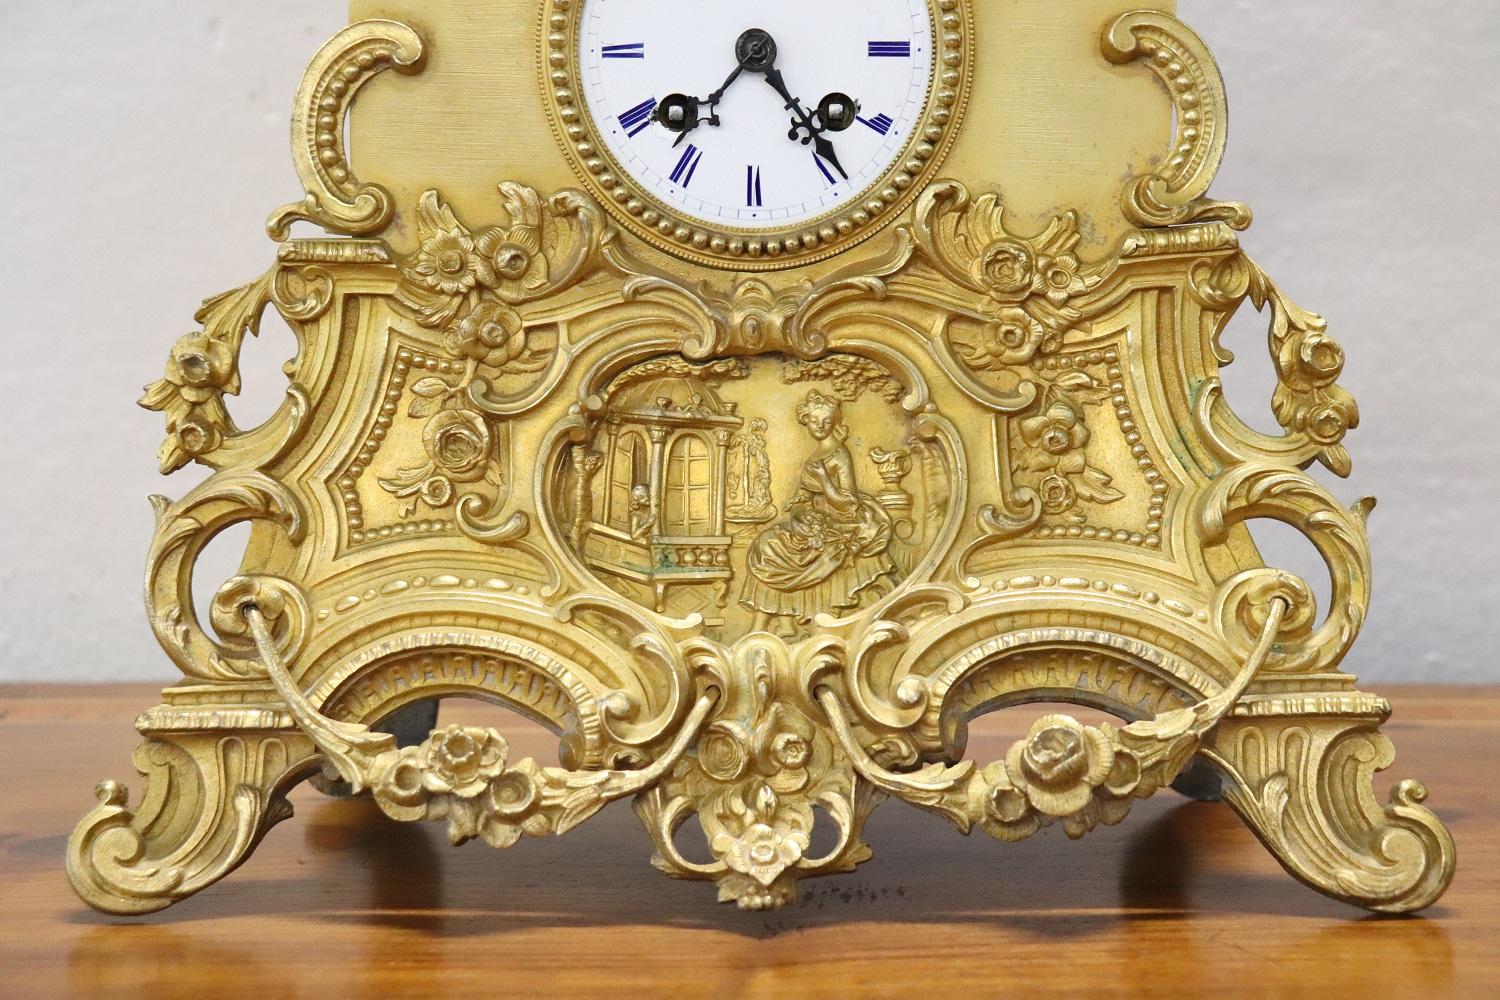 Rare antique 19th century table clock in ormolu gilt bronze. Characterized by a refined decoration chiseled in bronze, in the upper part a sweet girl leaning against a frose tree waiting for her lover. The mechanism is present but currently not